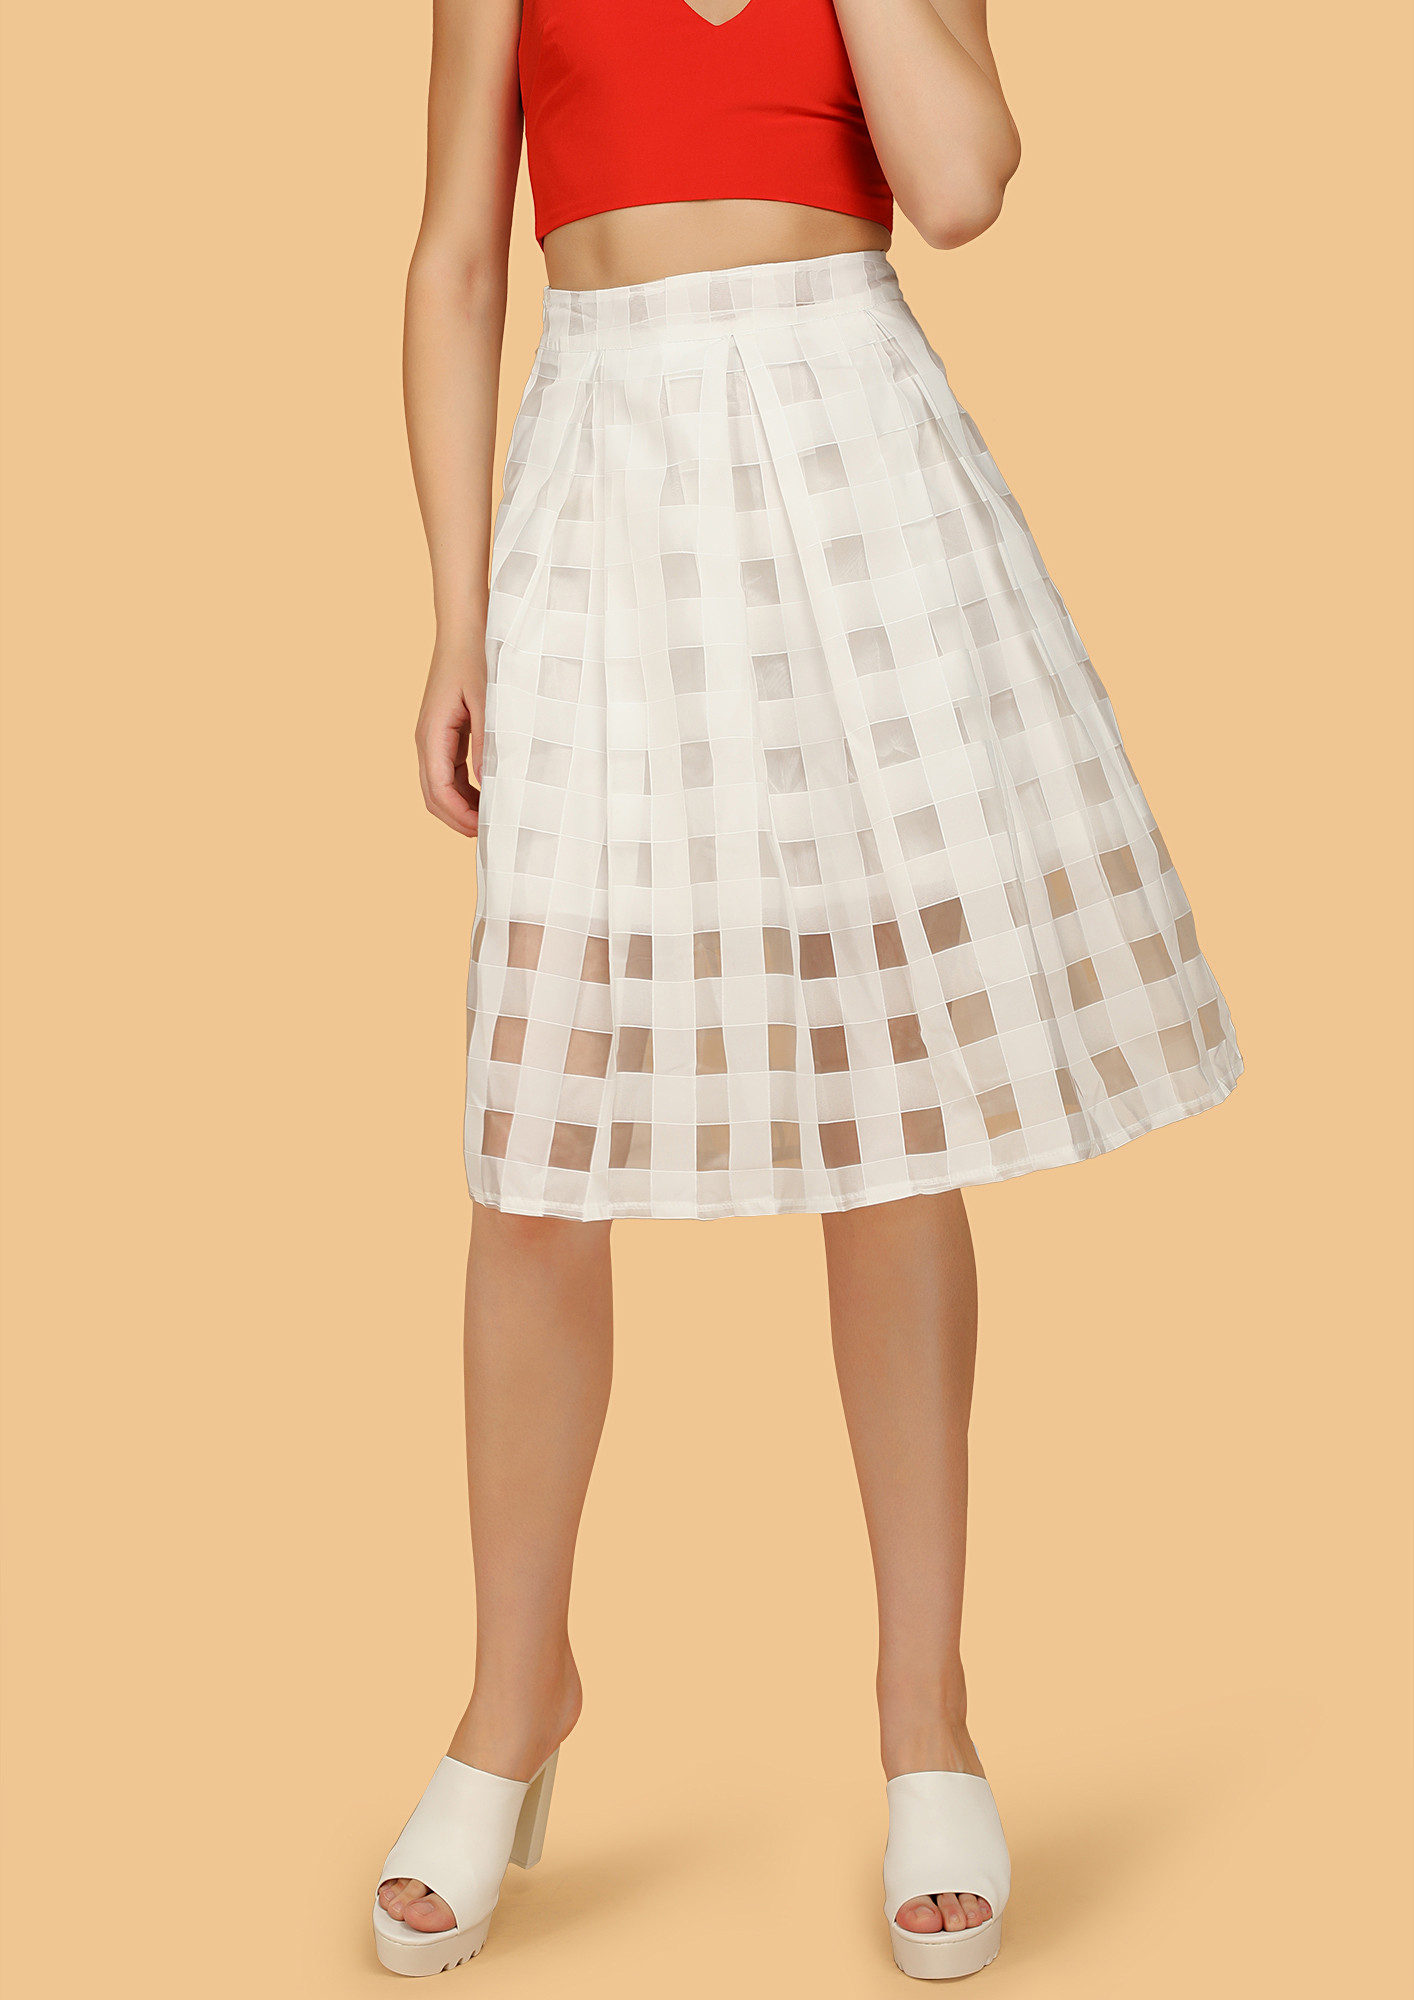 GIVING YOU A GRID VIEW WHITE MIDI SKIRT